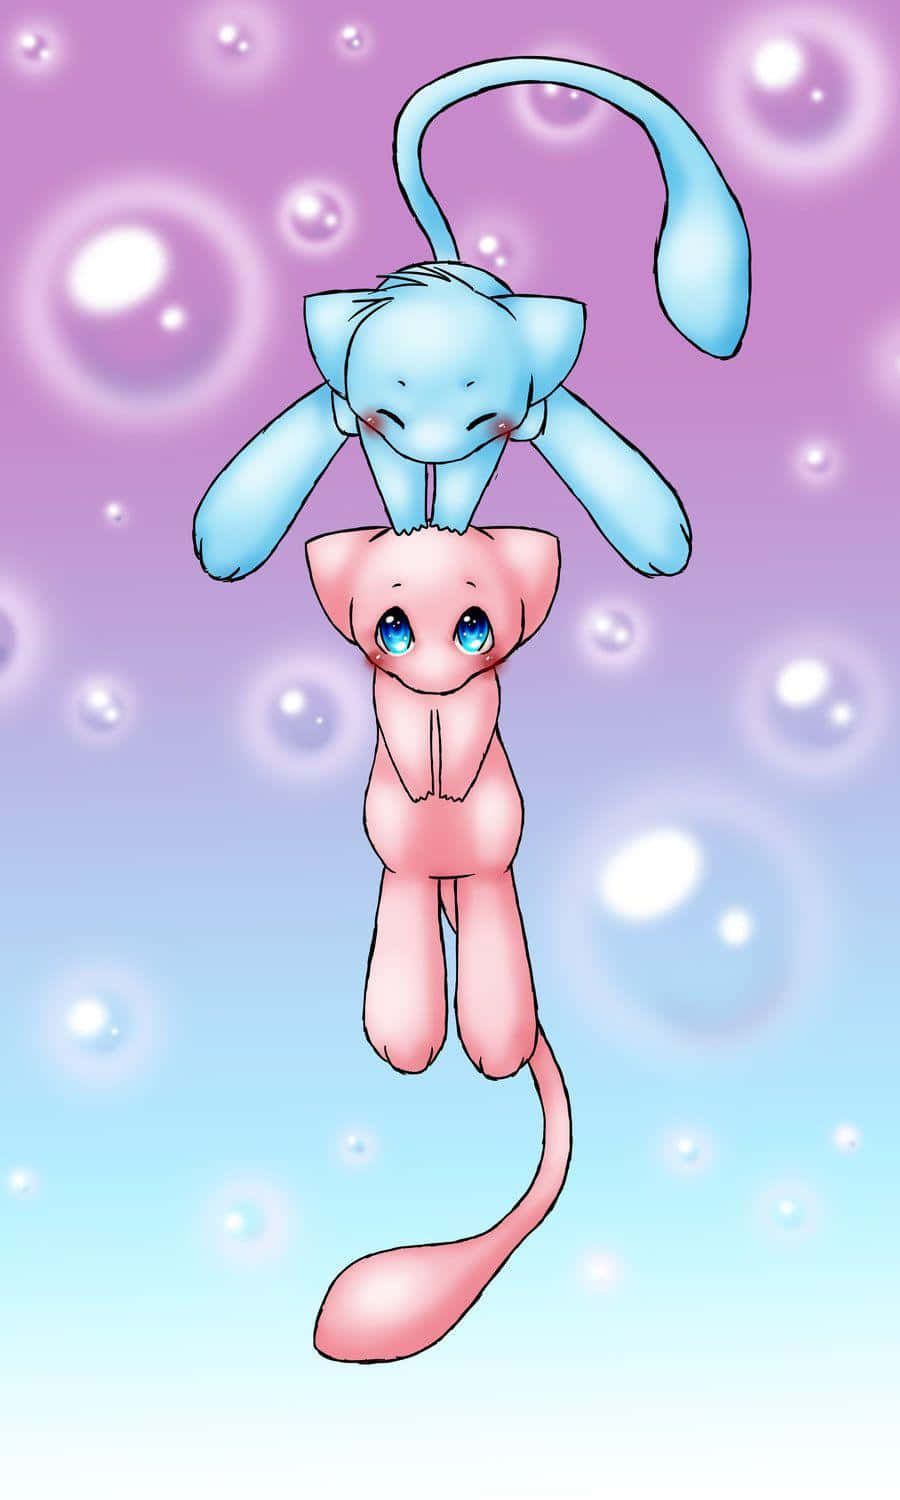 Adorable Mew to brighten up your day